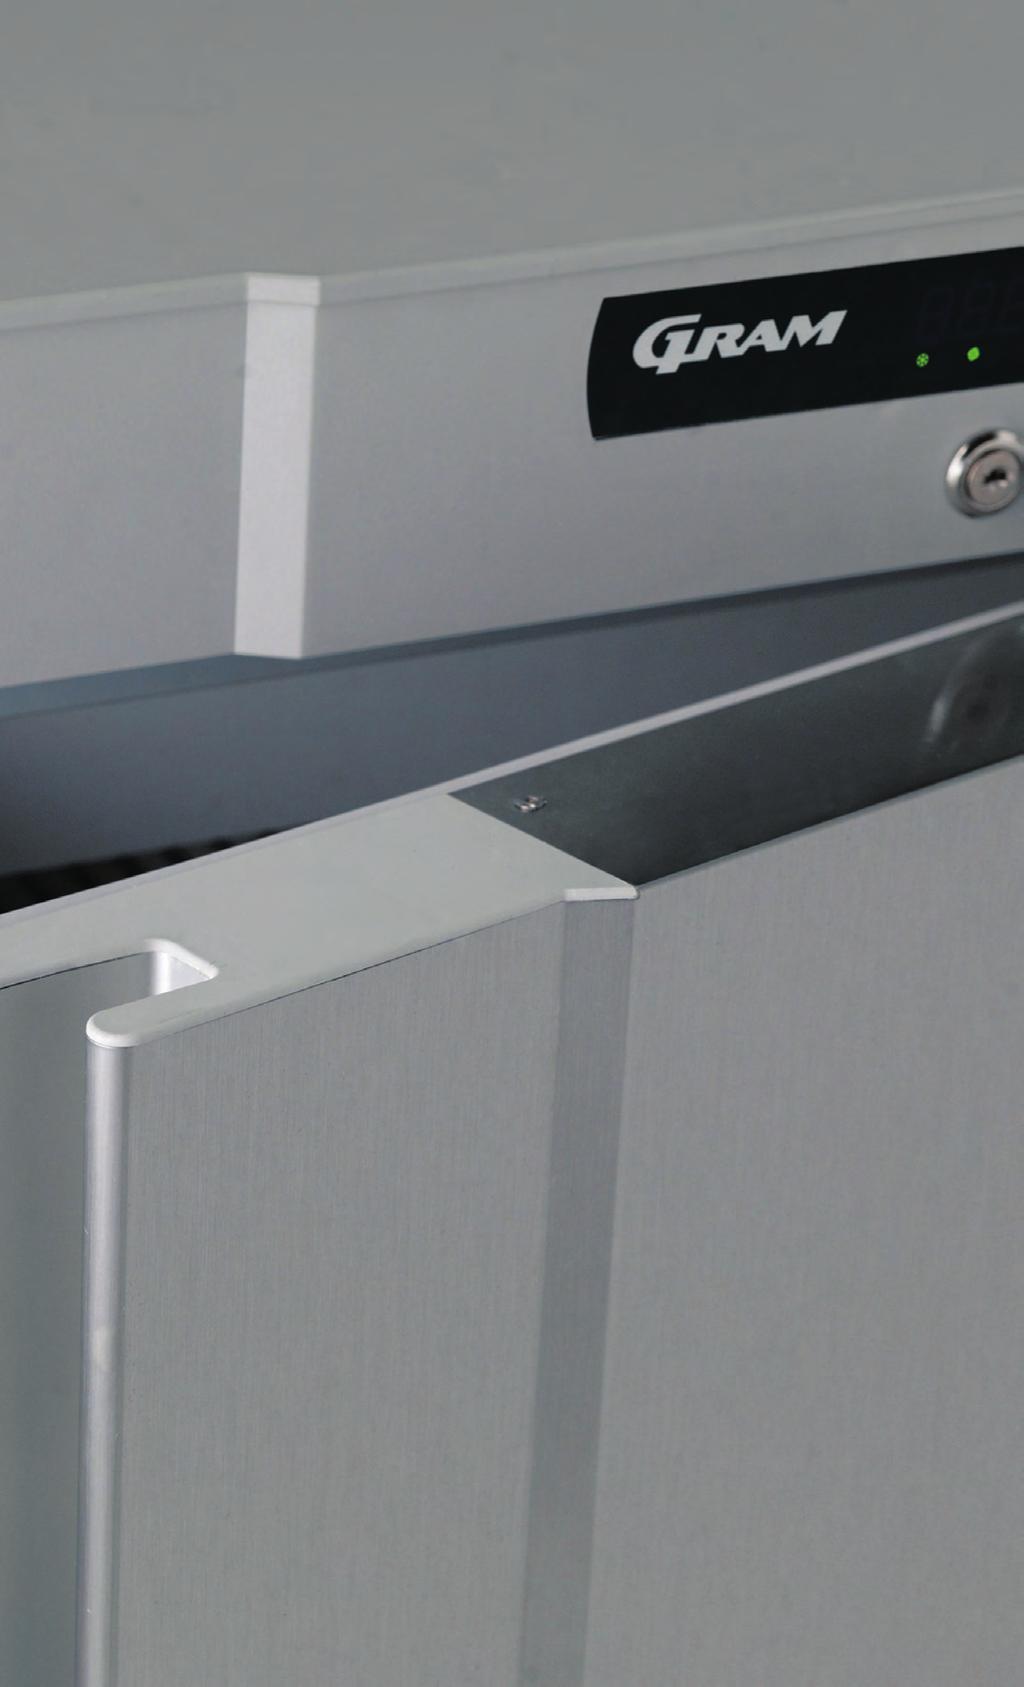 GRAM COMPACT lowest cost of ownership The GRAM COMPACT 210, 410 and 610 range is setting new standards for Compact